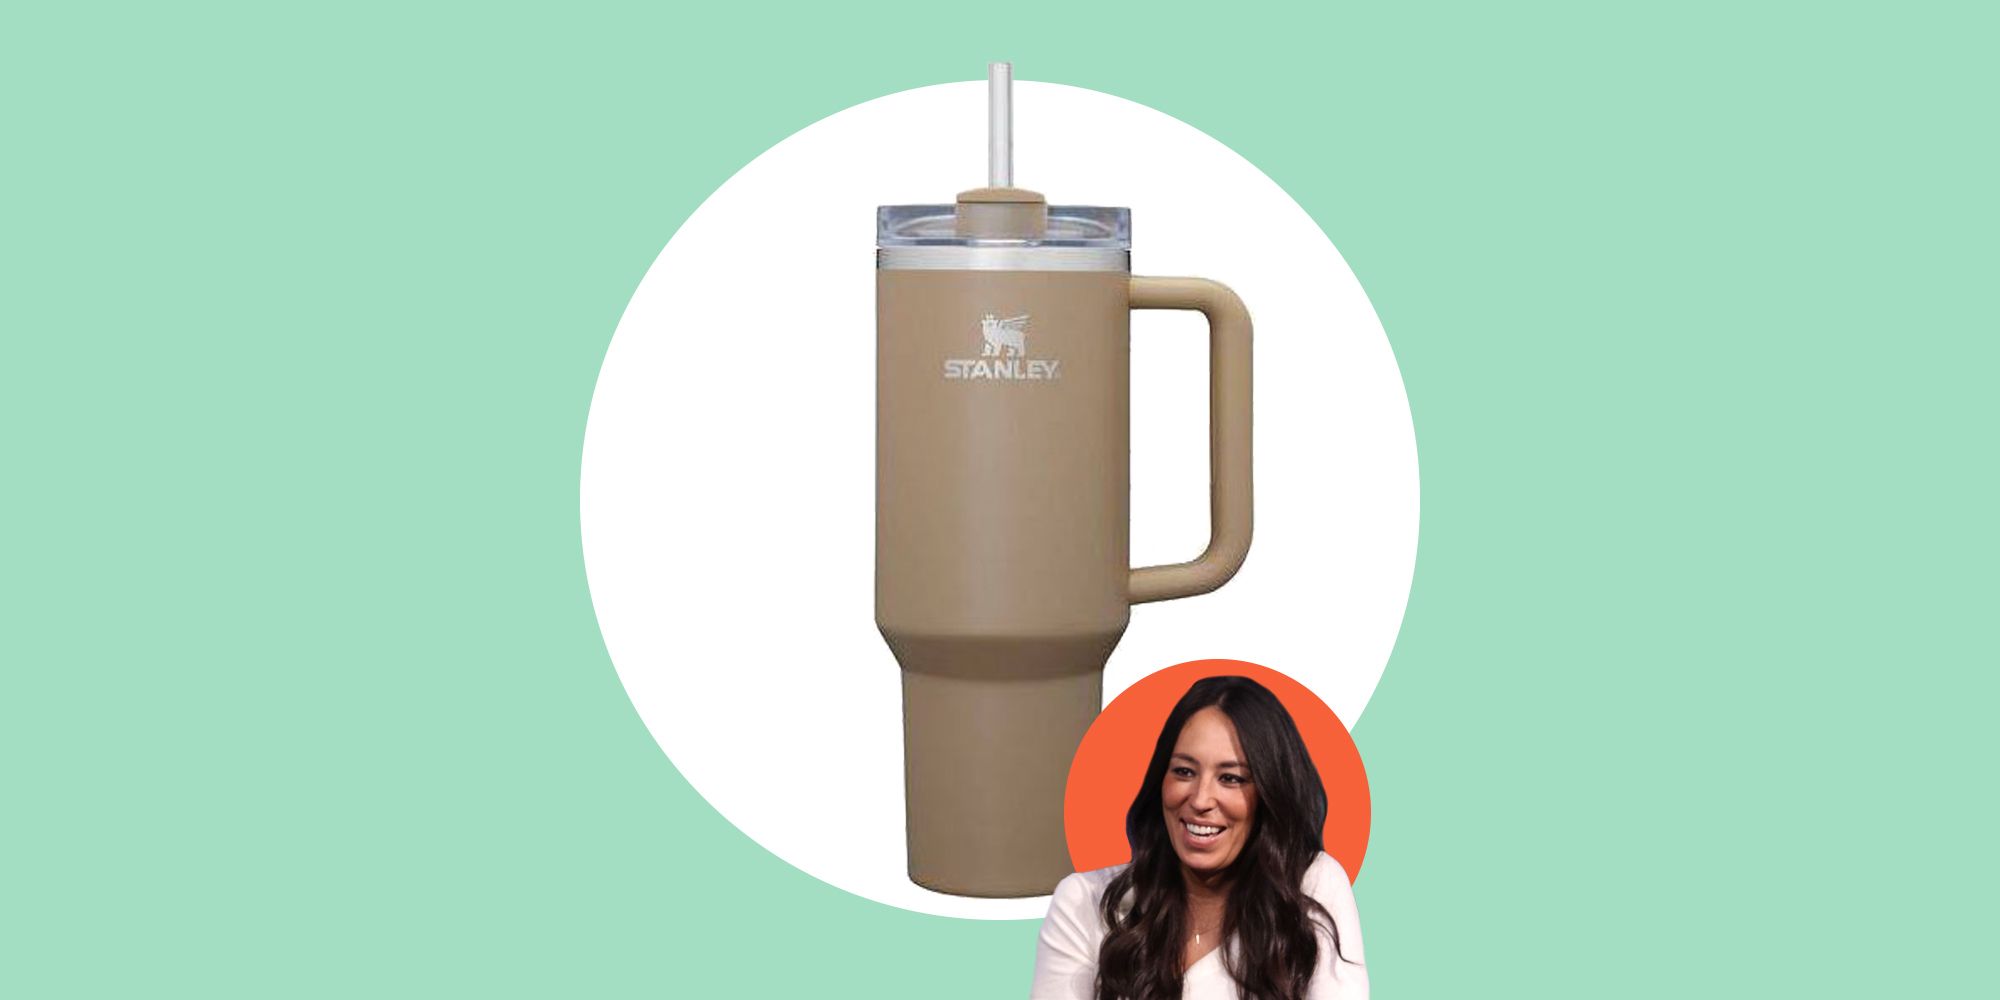 The New Joanna Gaines Stanley Tumbler Launch at Target